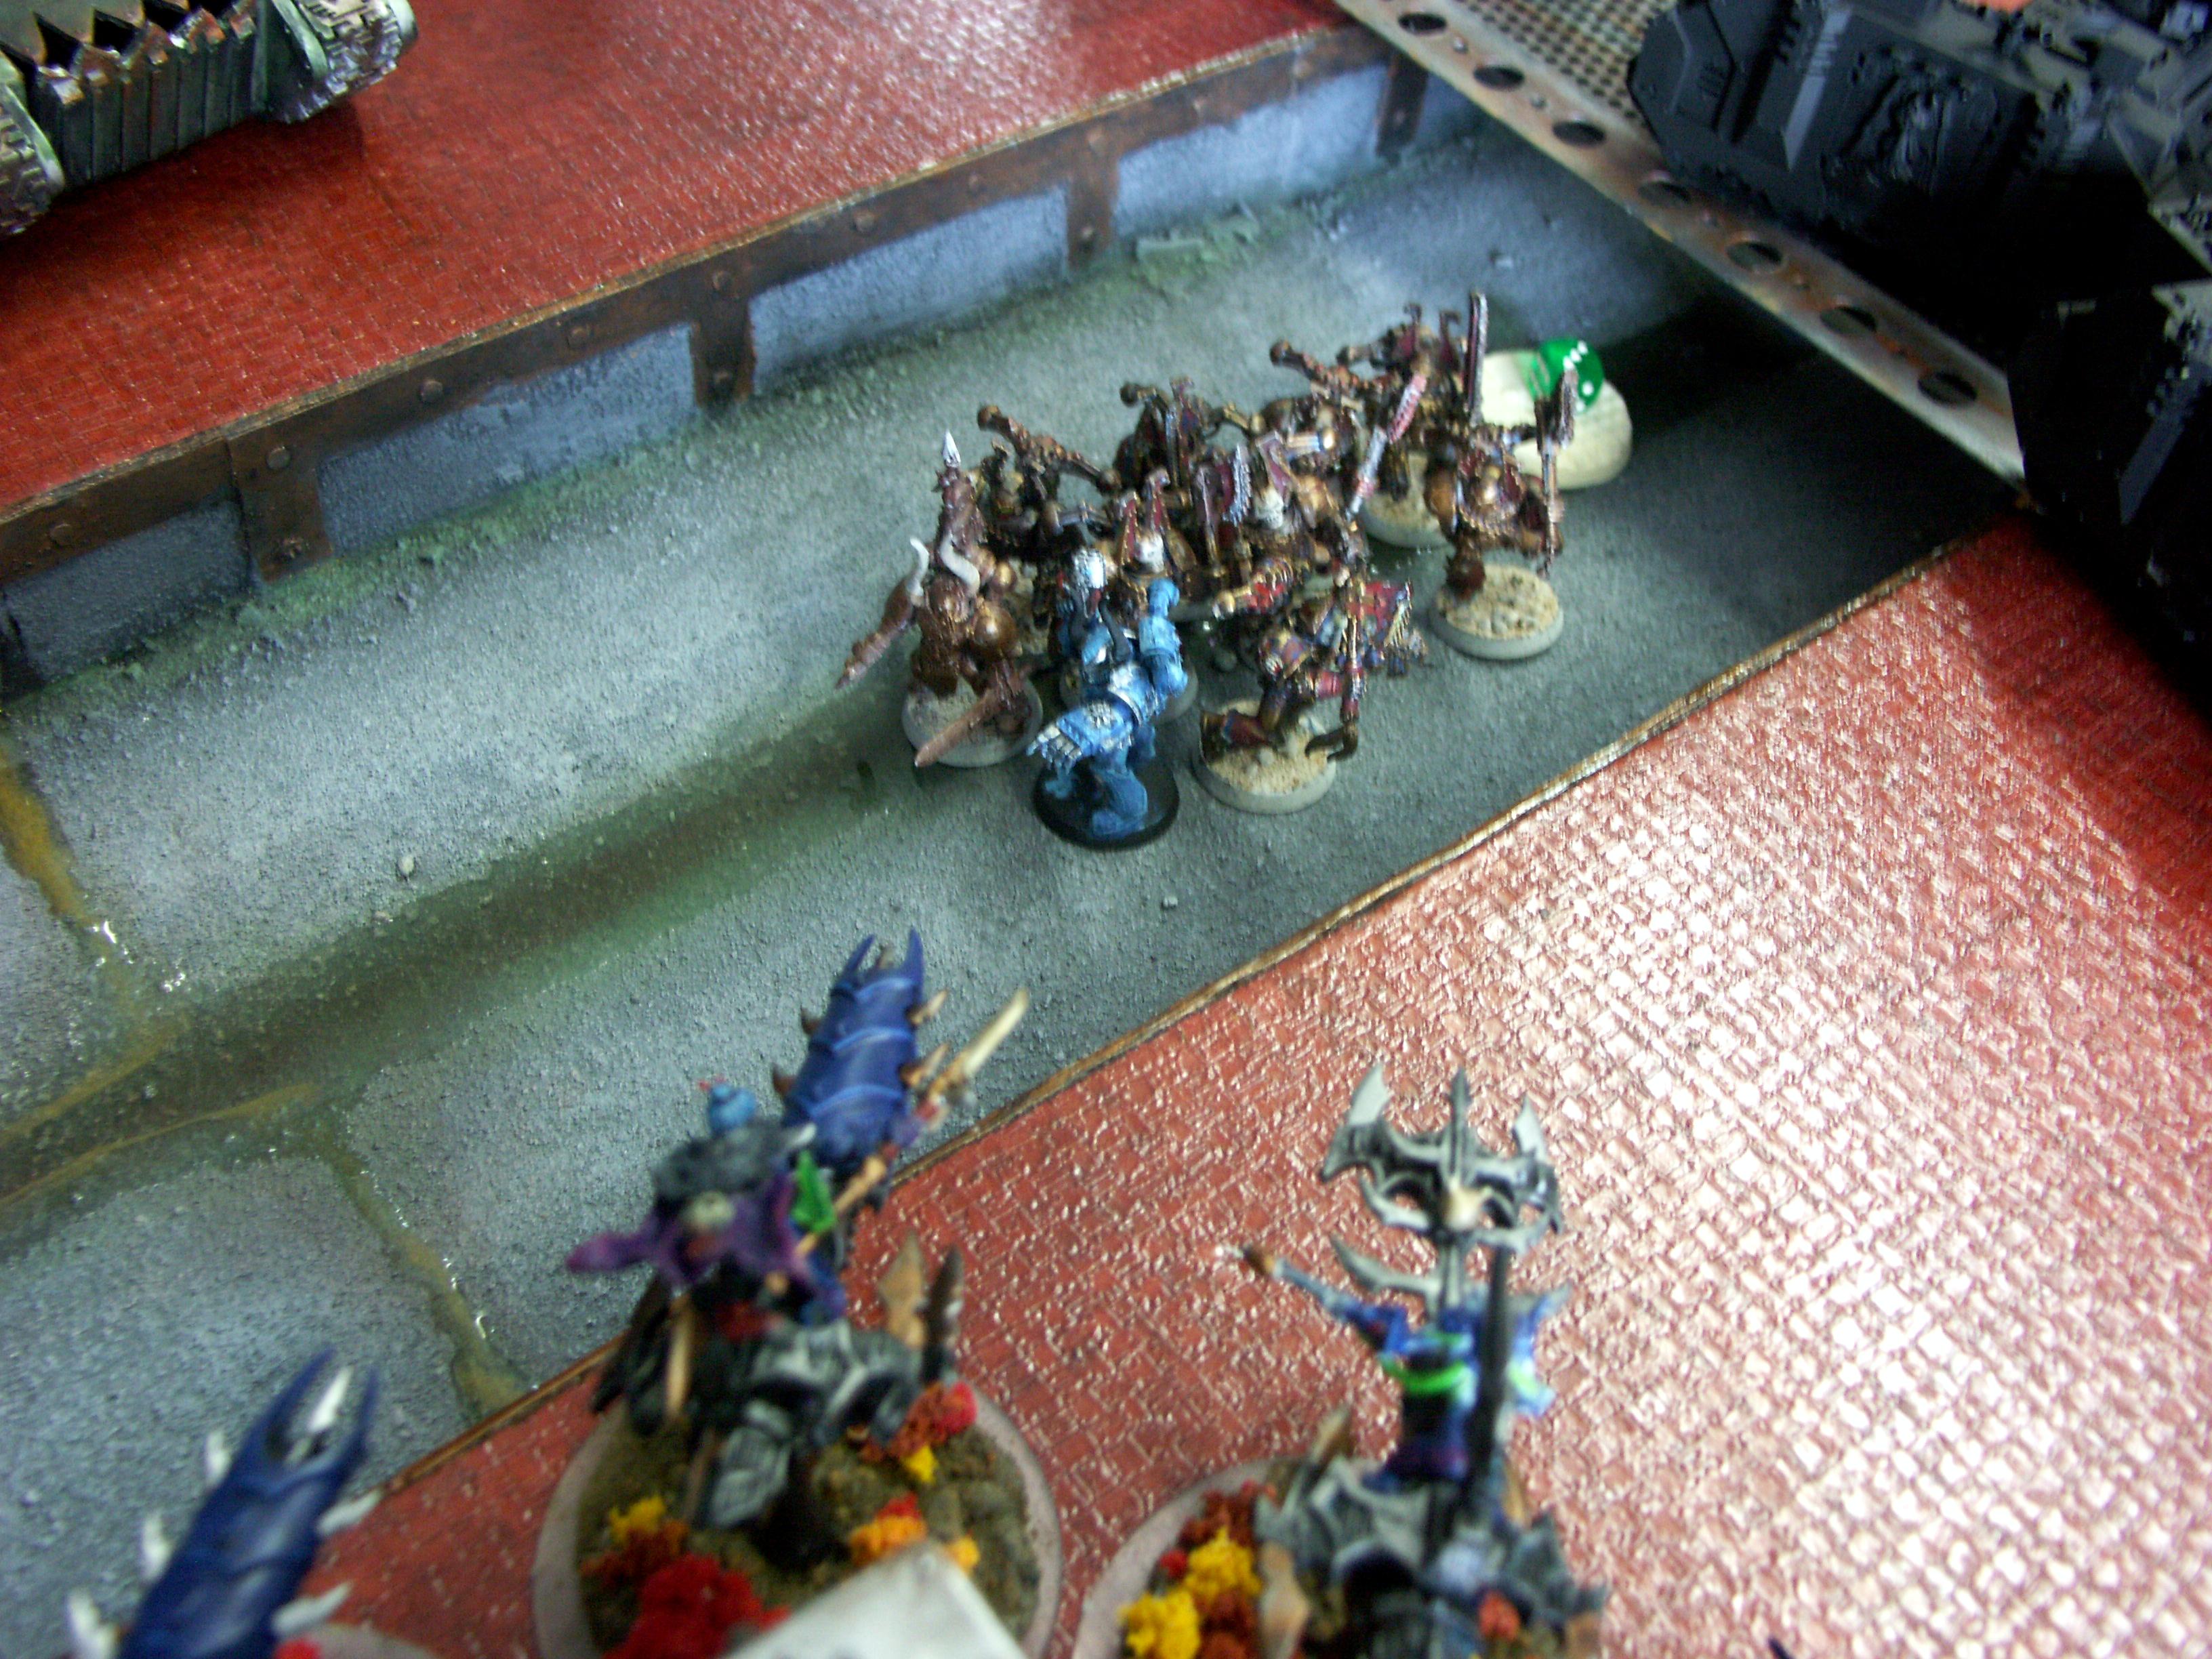 Battle Report, Chaos, Chaos Space Marines, Dark Eldar, De, Eldar, Space Marines, Space Wolves, Tourney